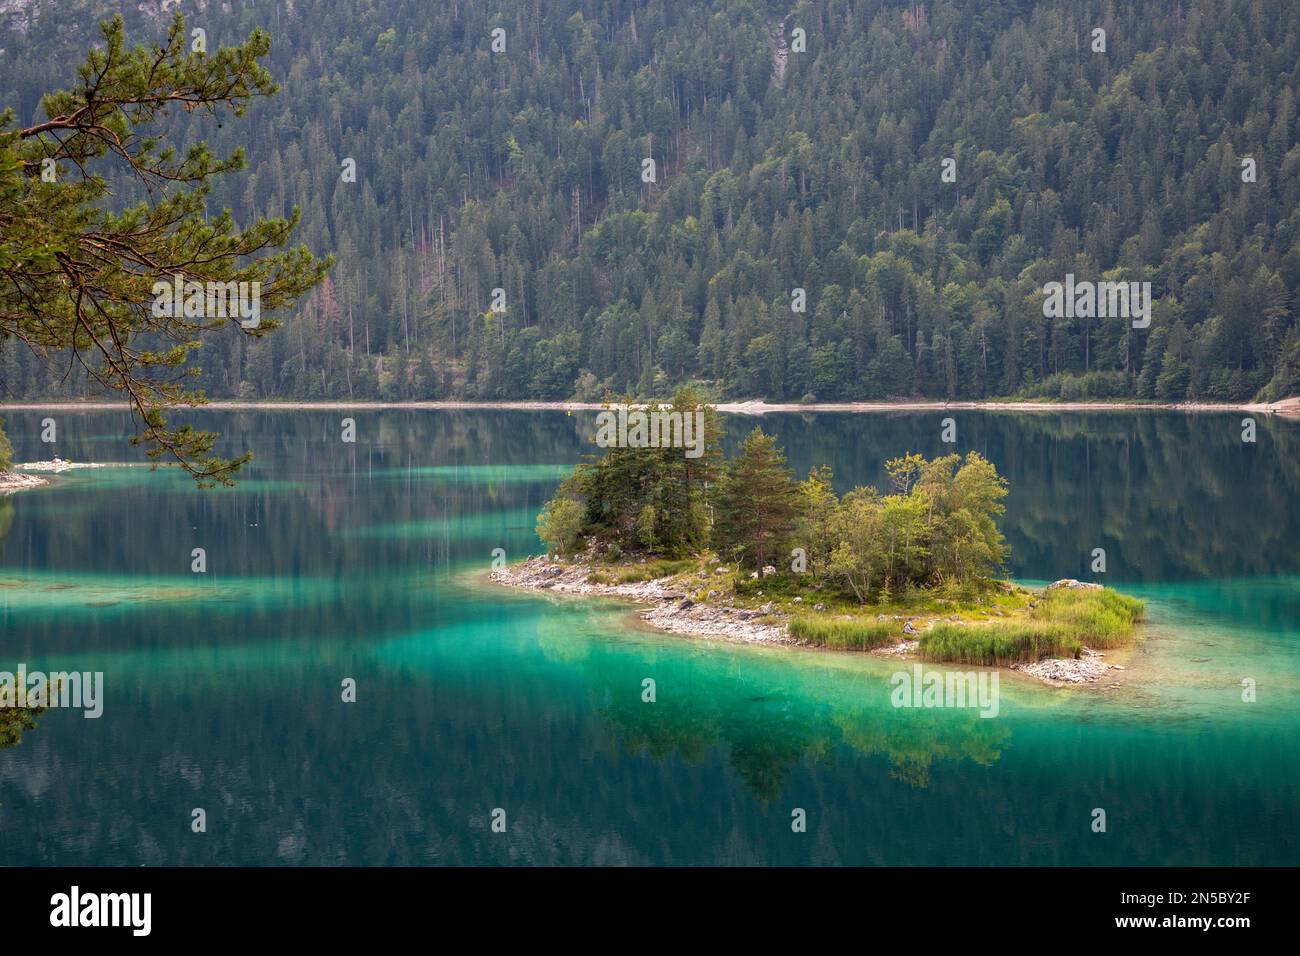 lake Eibsee with small islands in the turquoise water, Germany, Bavaria, Grainau Stock Photo